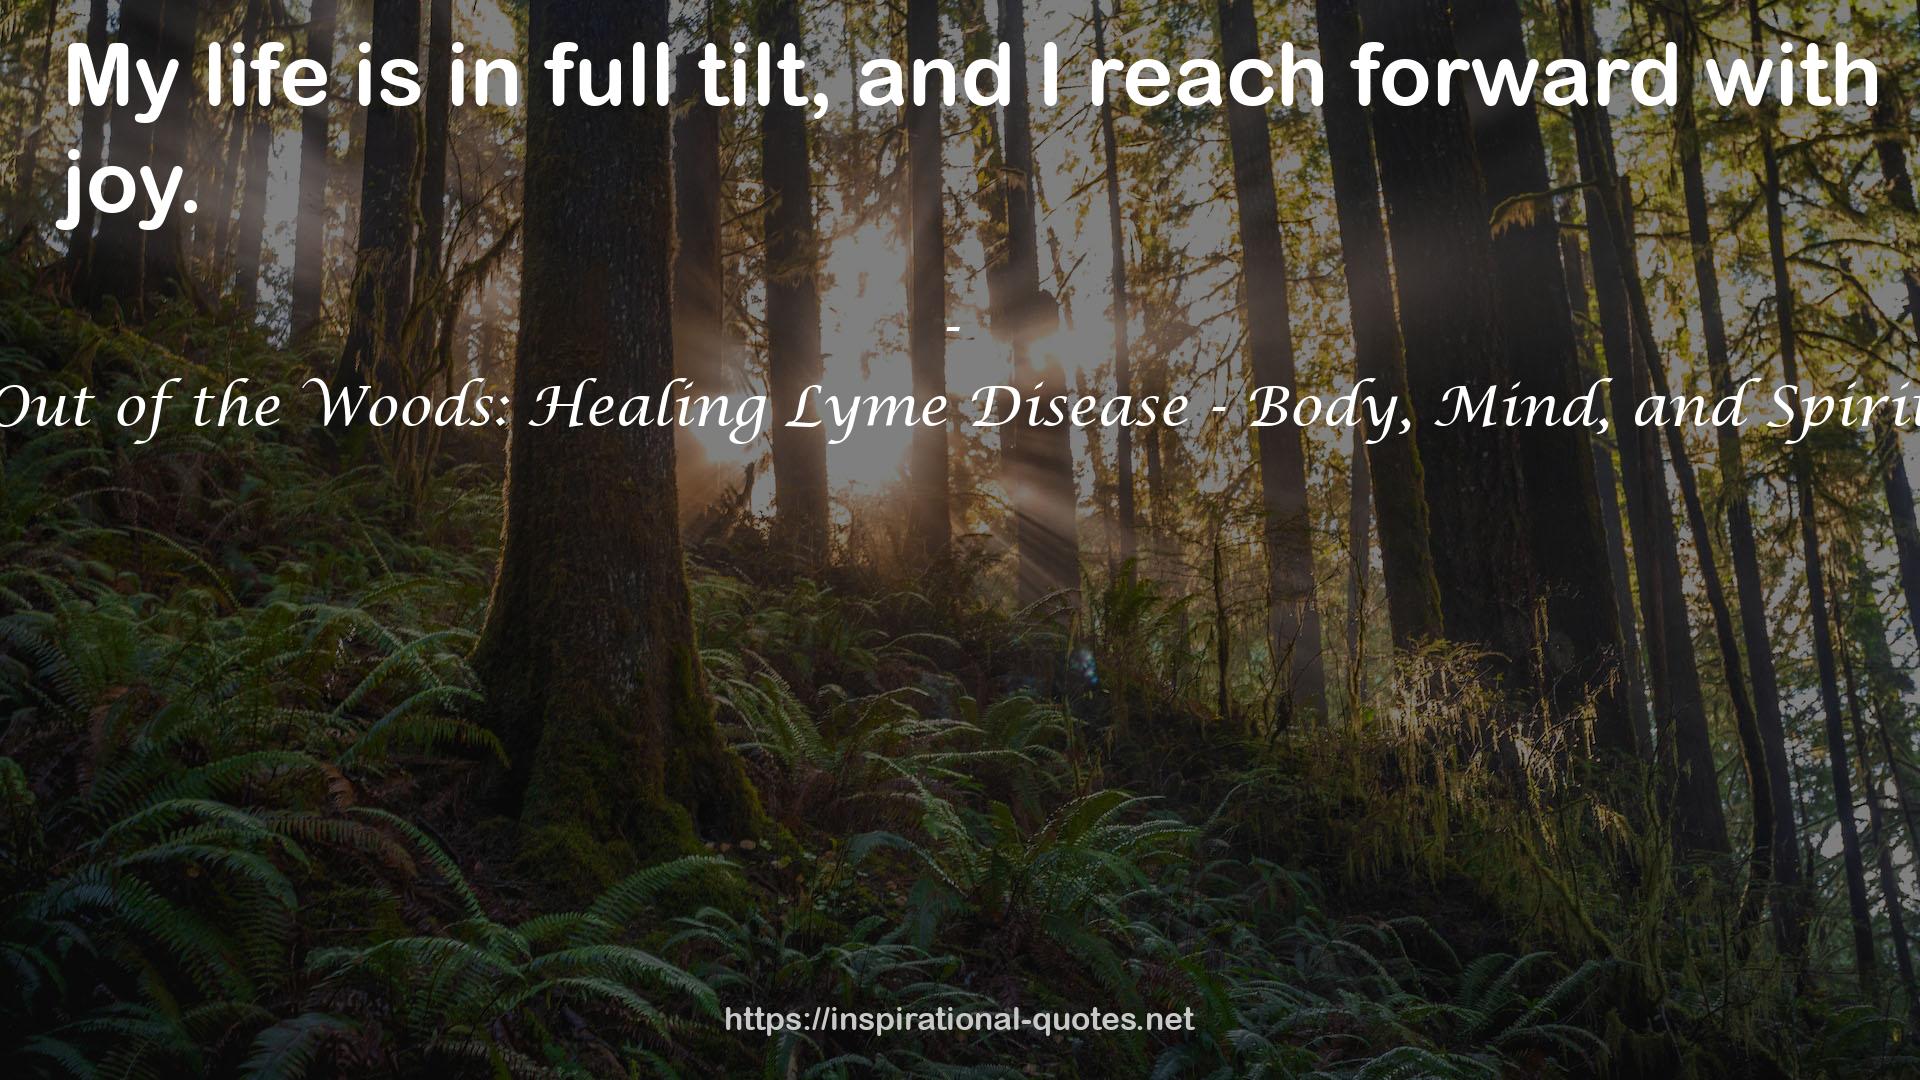 Out of the Woods: Healing Lyme Disease - Body, Mind, and Spirit QUOTES